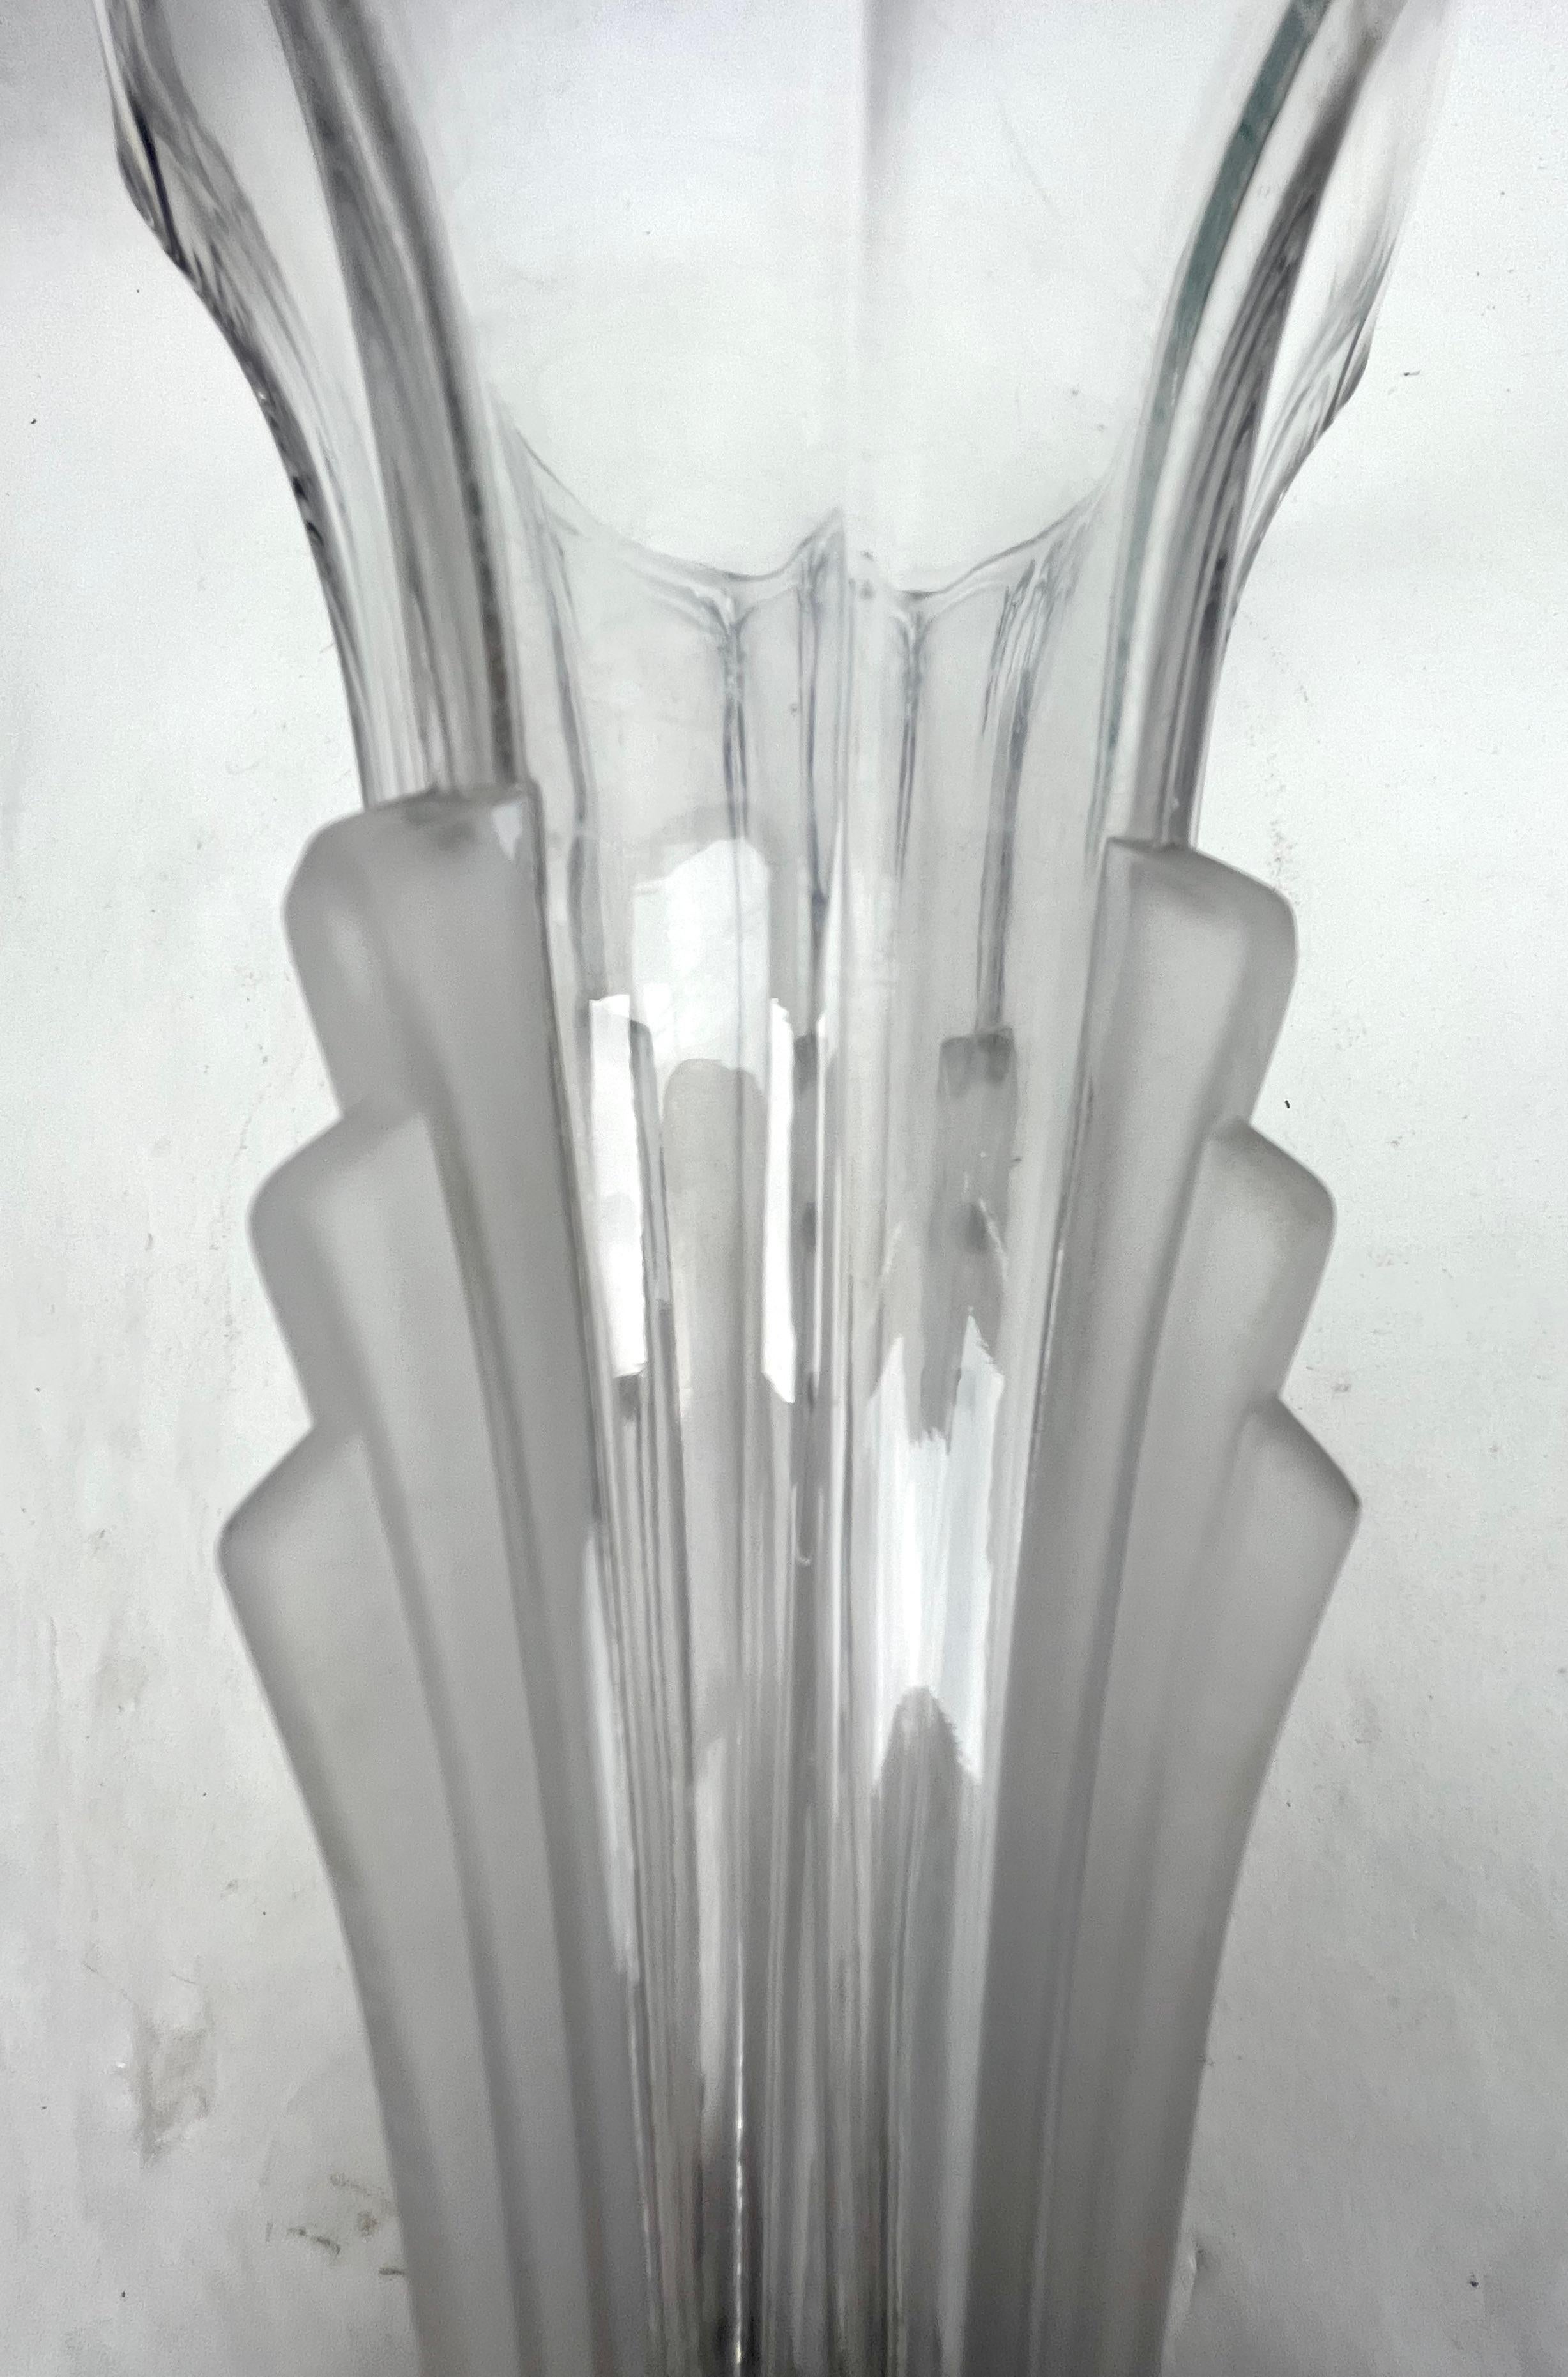 Art Deco Moulded glass vase, Czechoslovakia 1930s

Art Deco molded-glass vase from the 1930s 
A superb, well-made molded-glass vase produced in Czechoslovakia. 
A very Art Deco shape with curved glass and straight vertical lines.

The piece is in